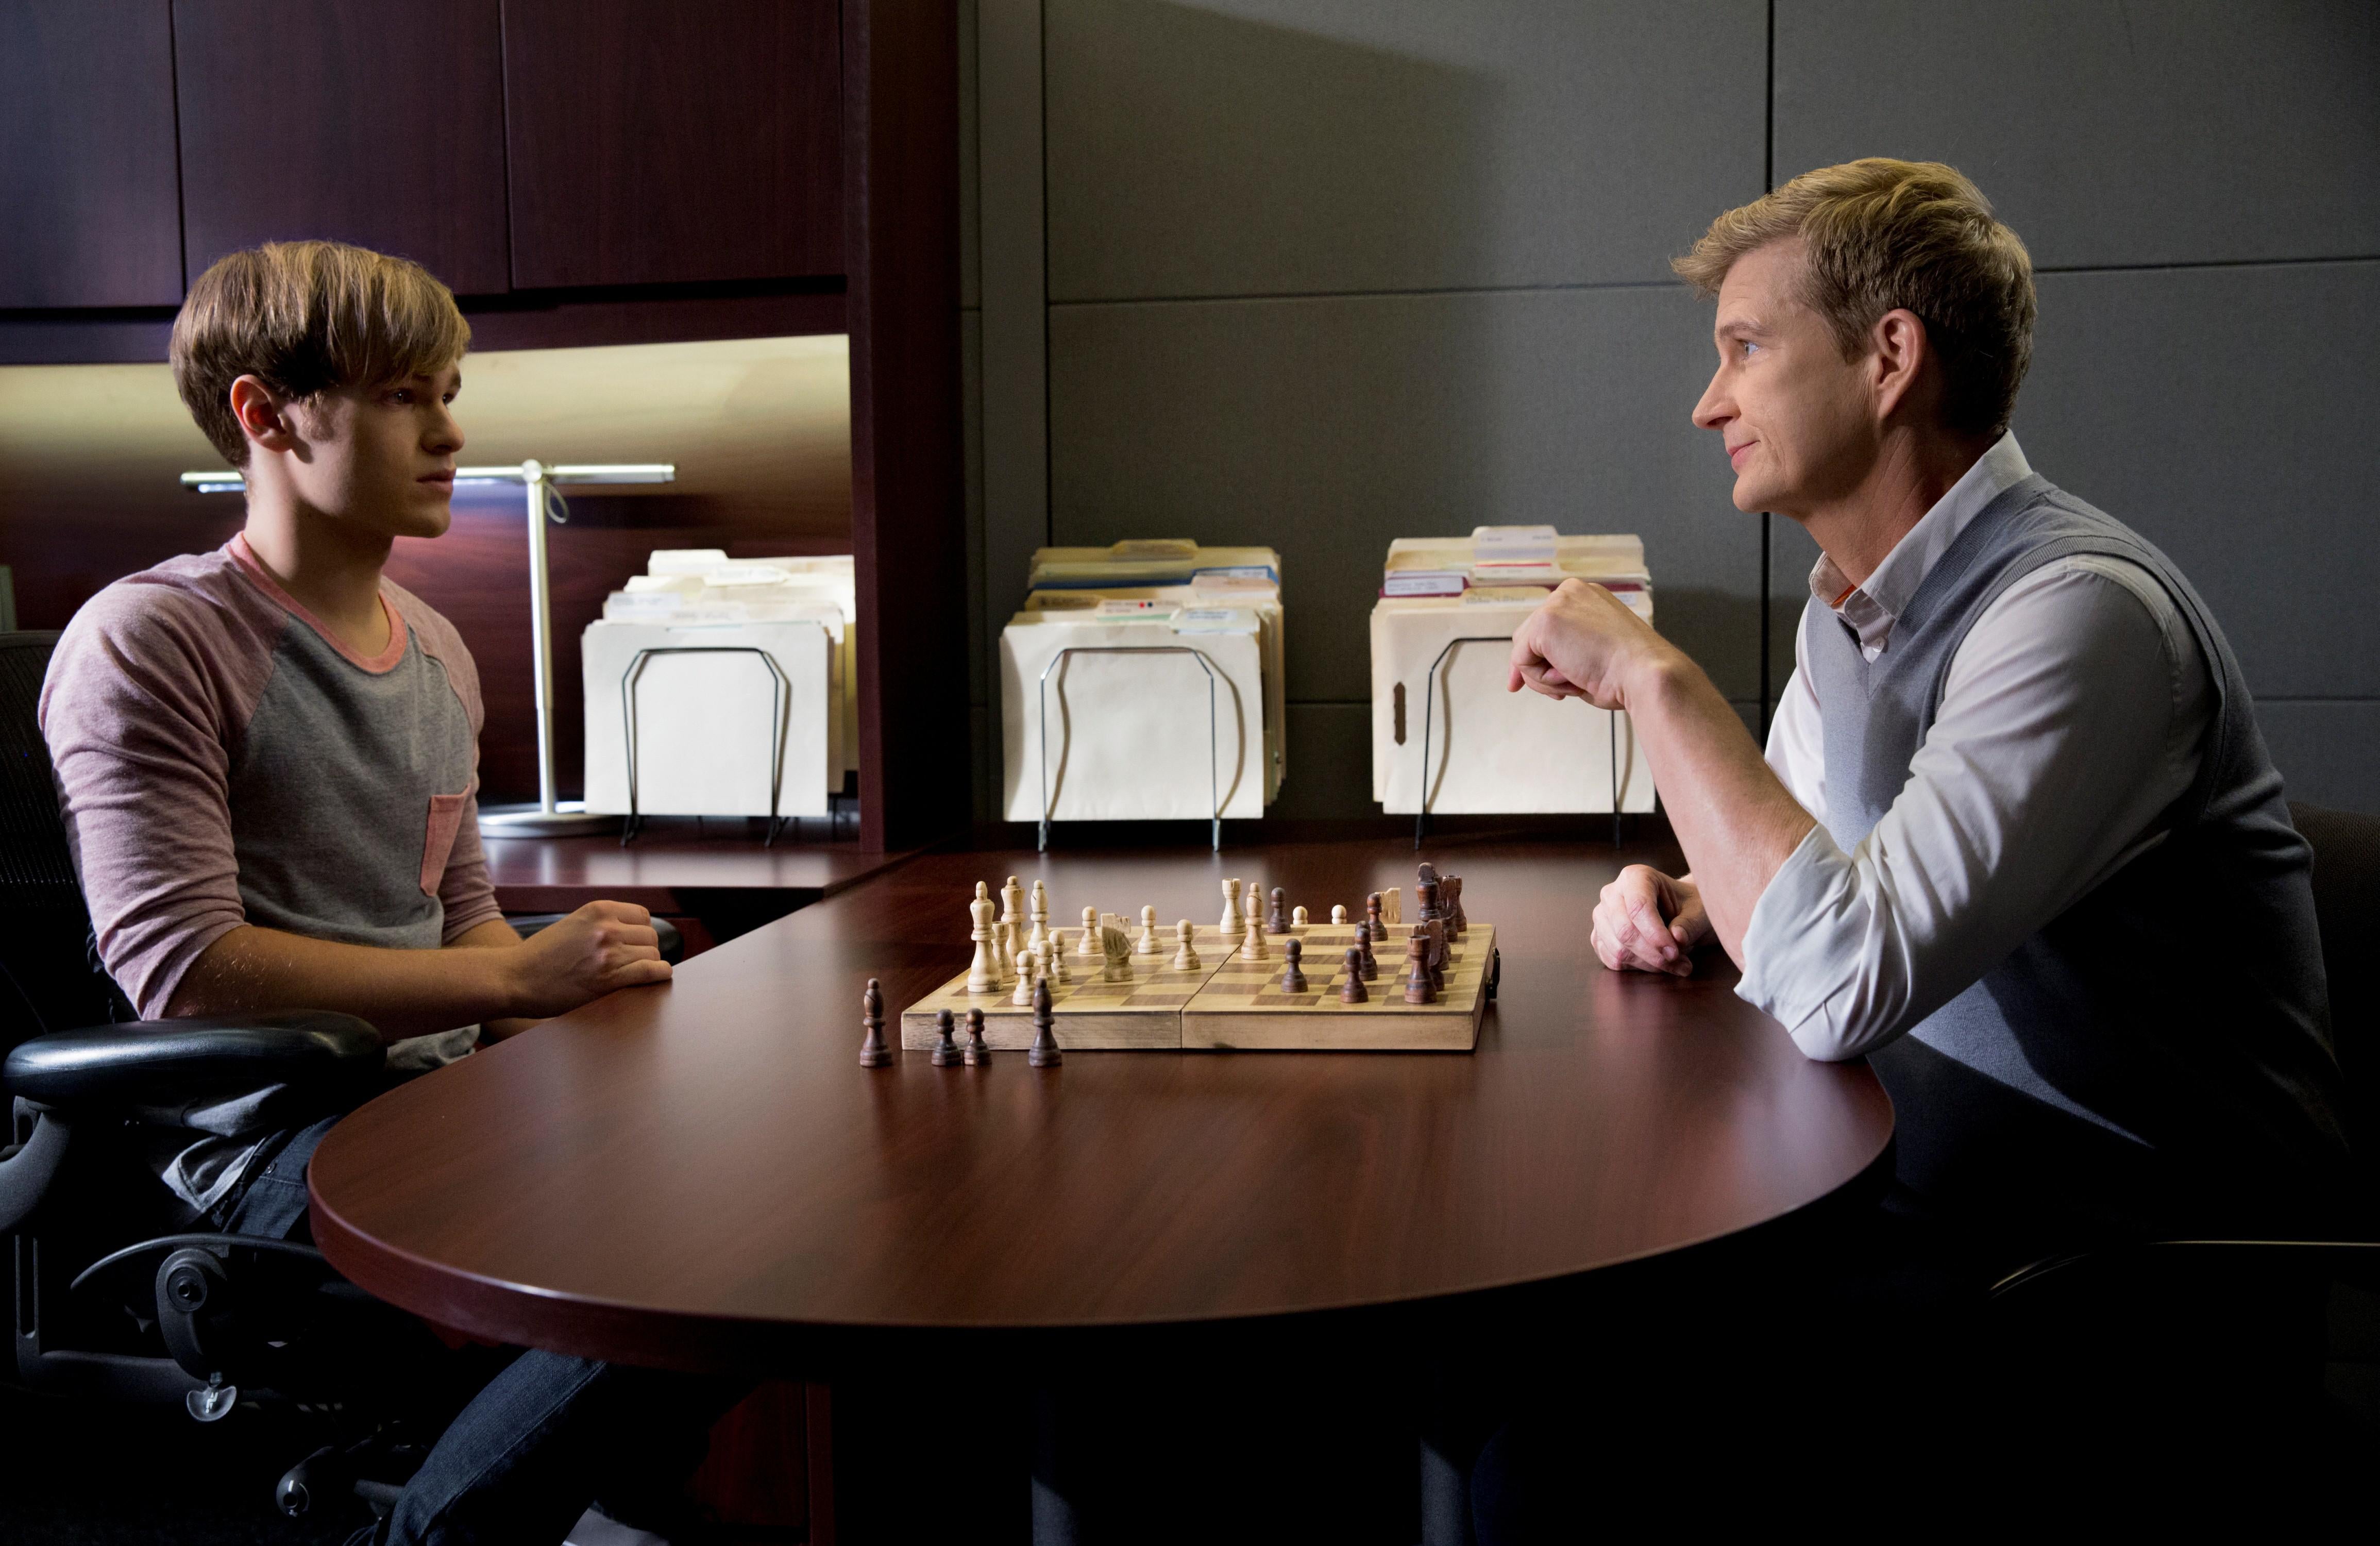 Rusty (Patrick Graham Martin) and his new therapist (Bill Brochtrup) in Major Crimes.